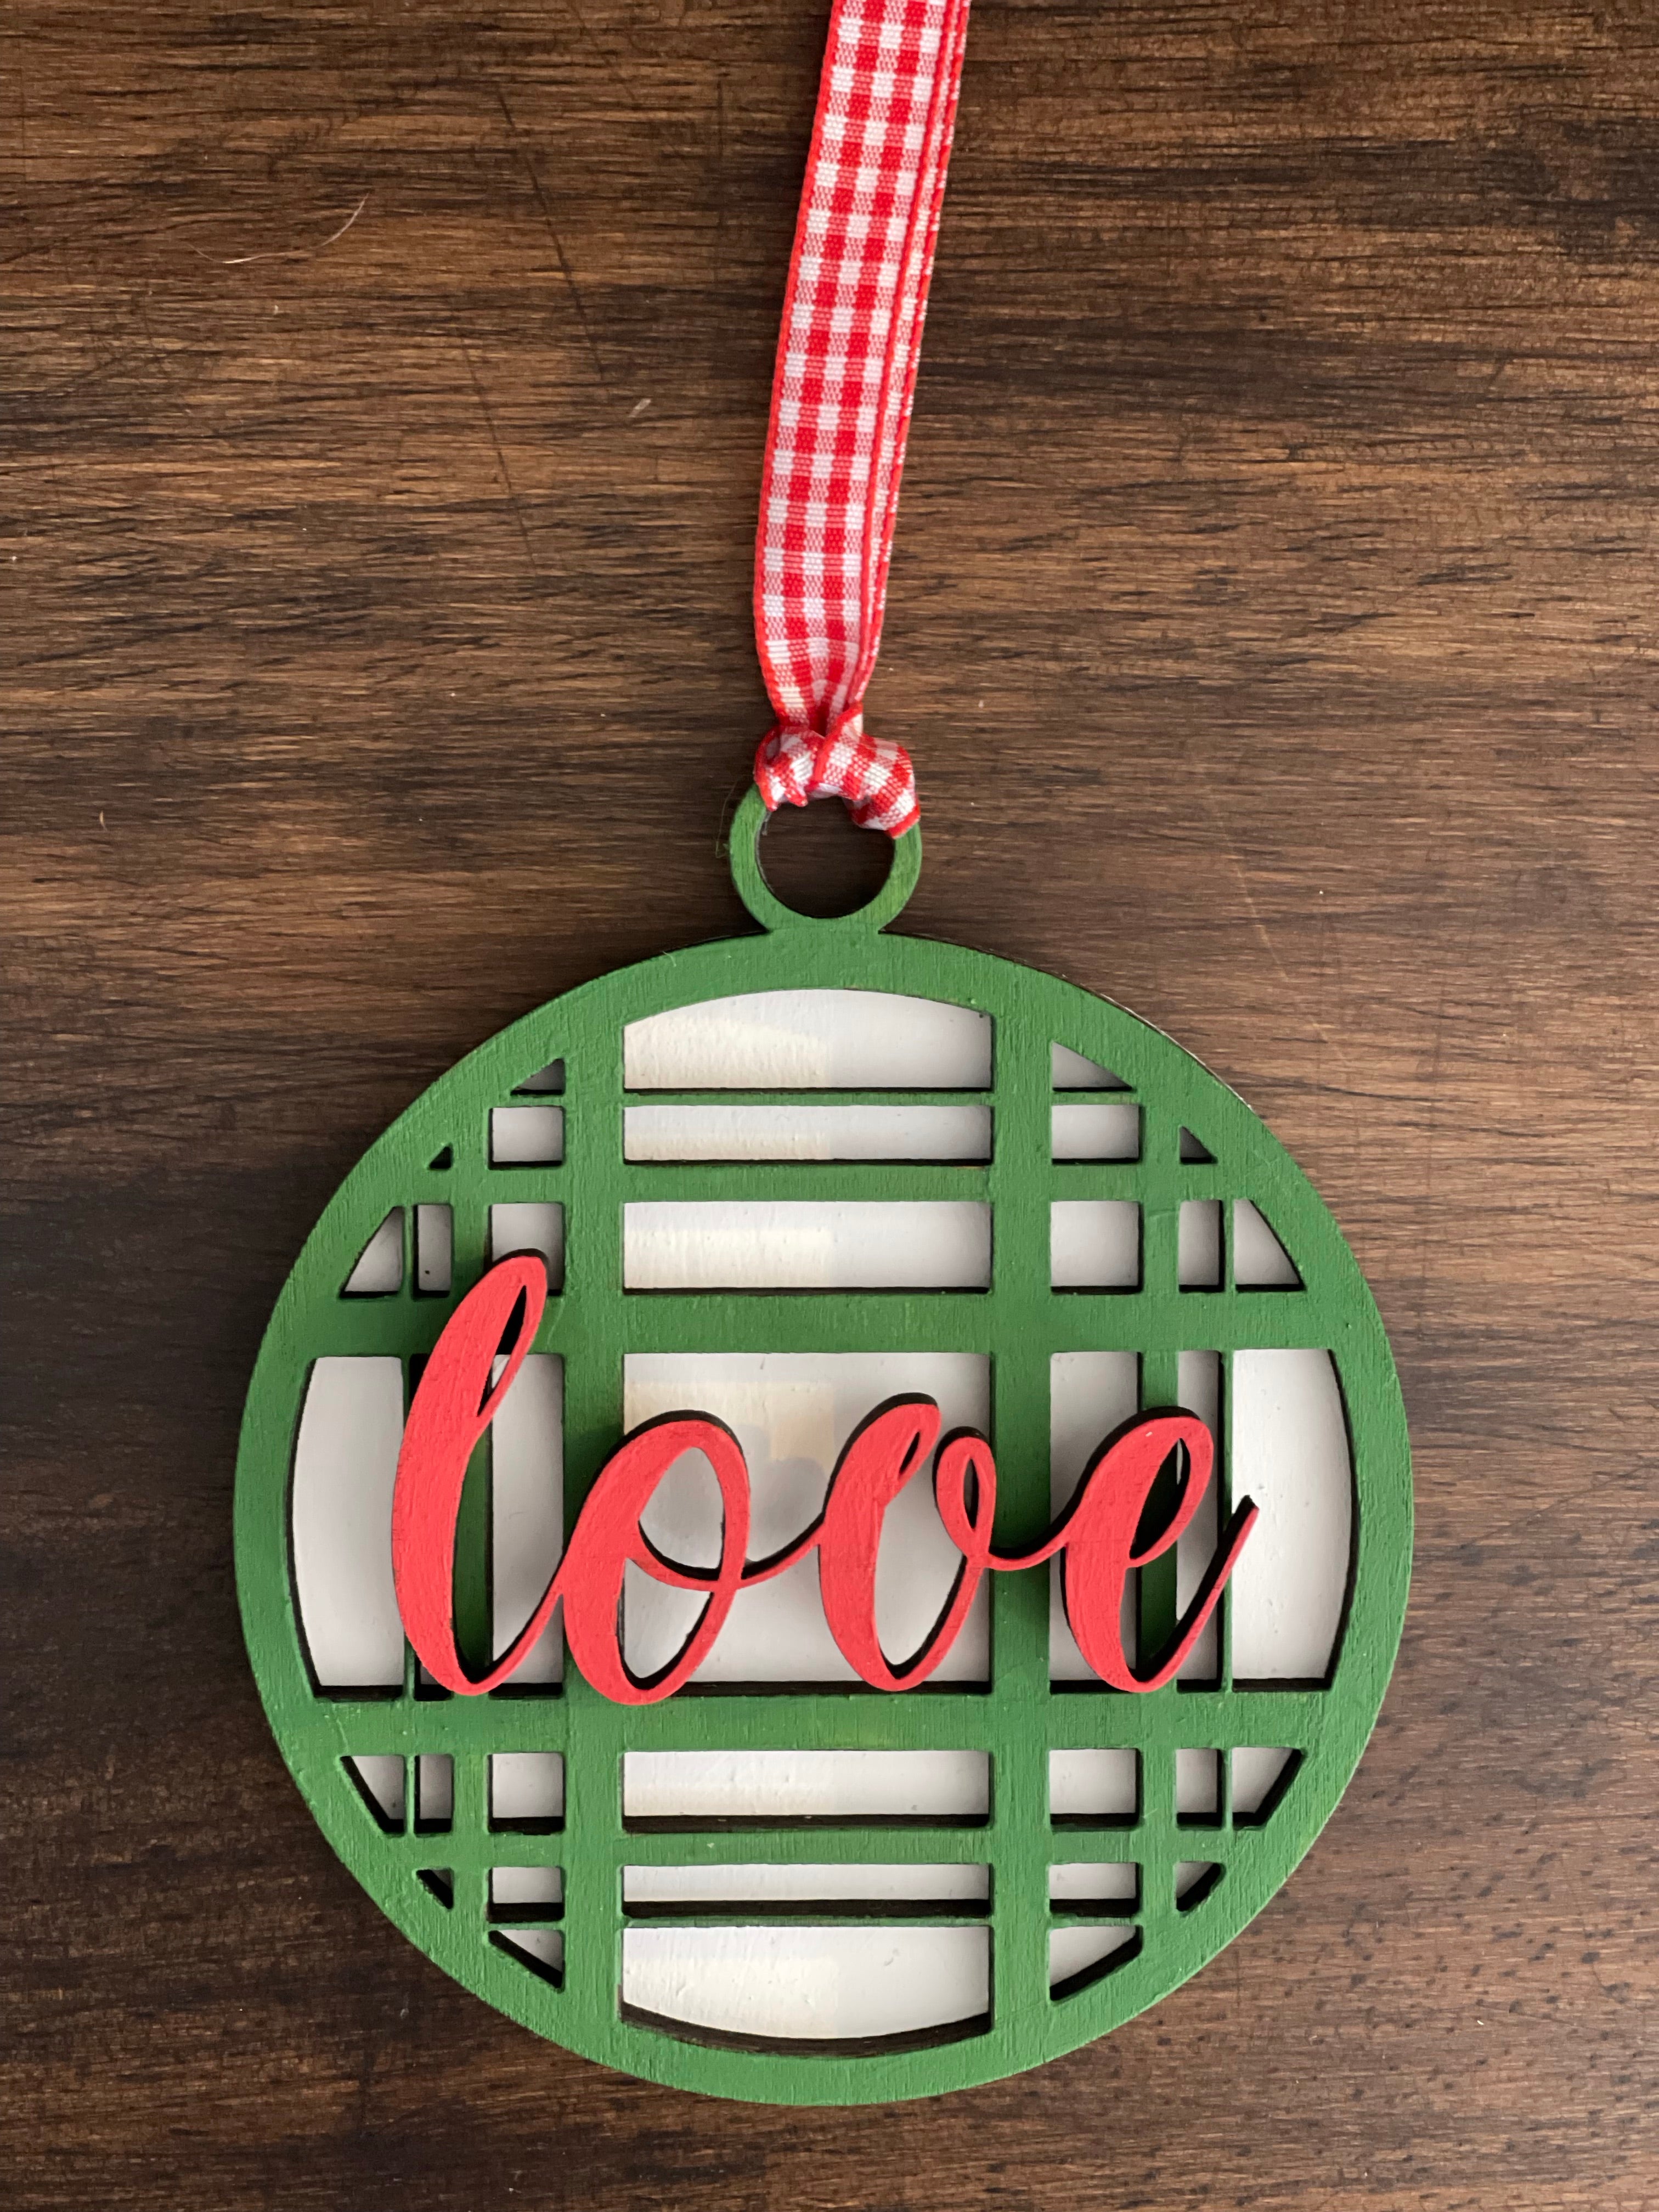 This is the green plaid love ornament without a twine bow.